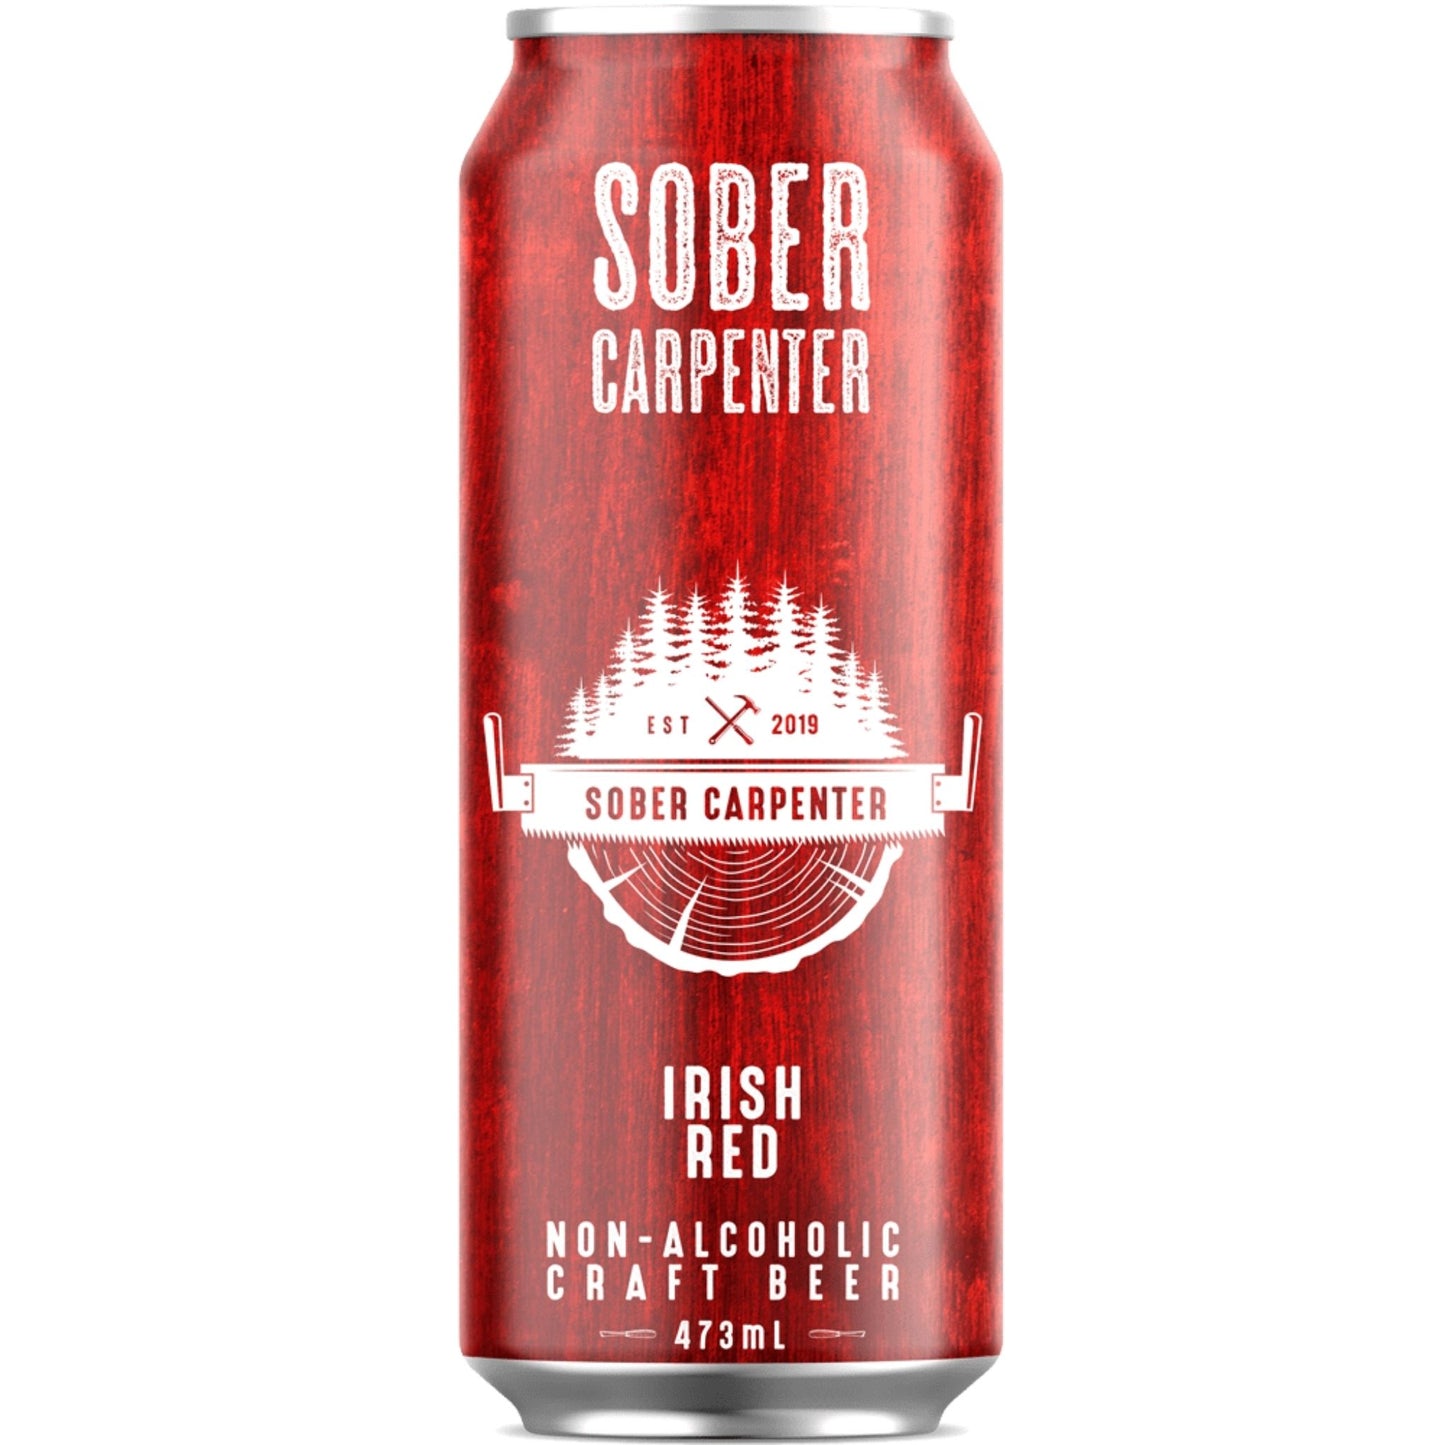 A photo of Sober Carpenter Irish Red. Available for at home delivery from Knyota Drinks. Brewed in the Irish style with Windsor yeast, you'll notice the malt focused aromas of this medium bodied ale. The roasted barley translated into subtle notes of coffee and caramel.